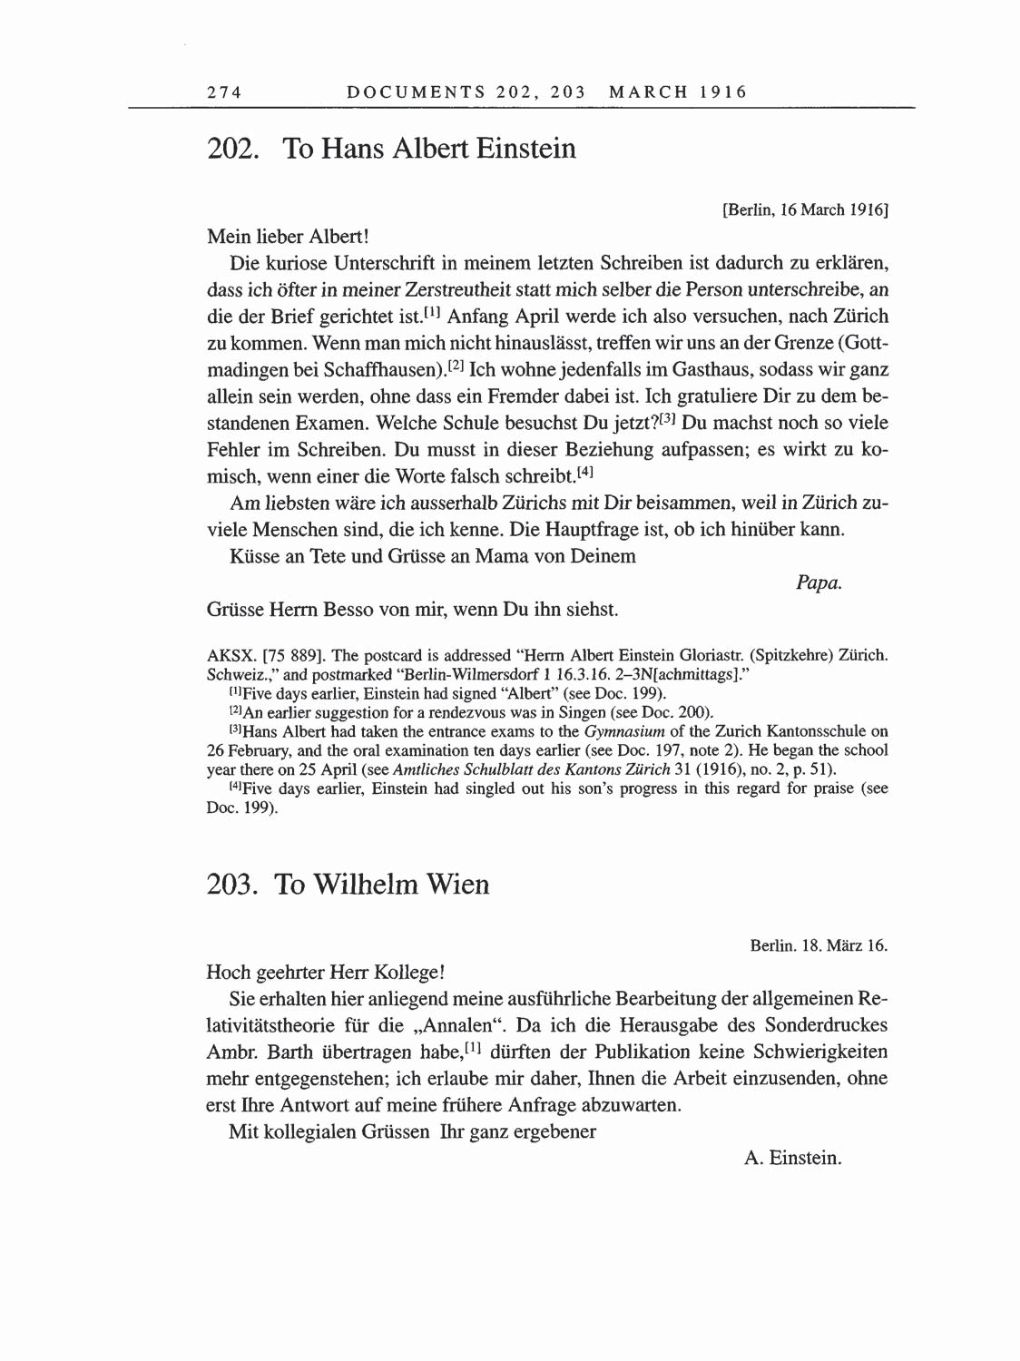 Volume 8, Part A: The Berlin Years: Correspondence 1914-1917 page 274